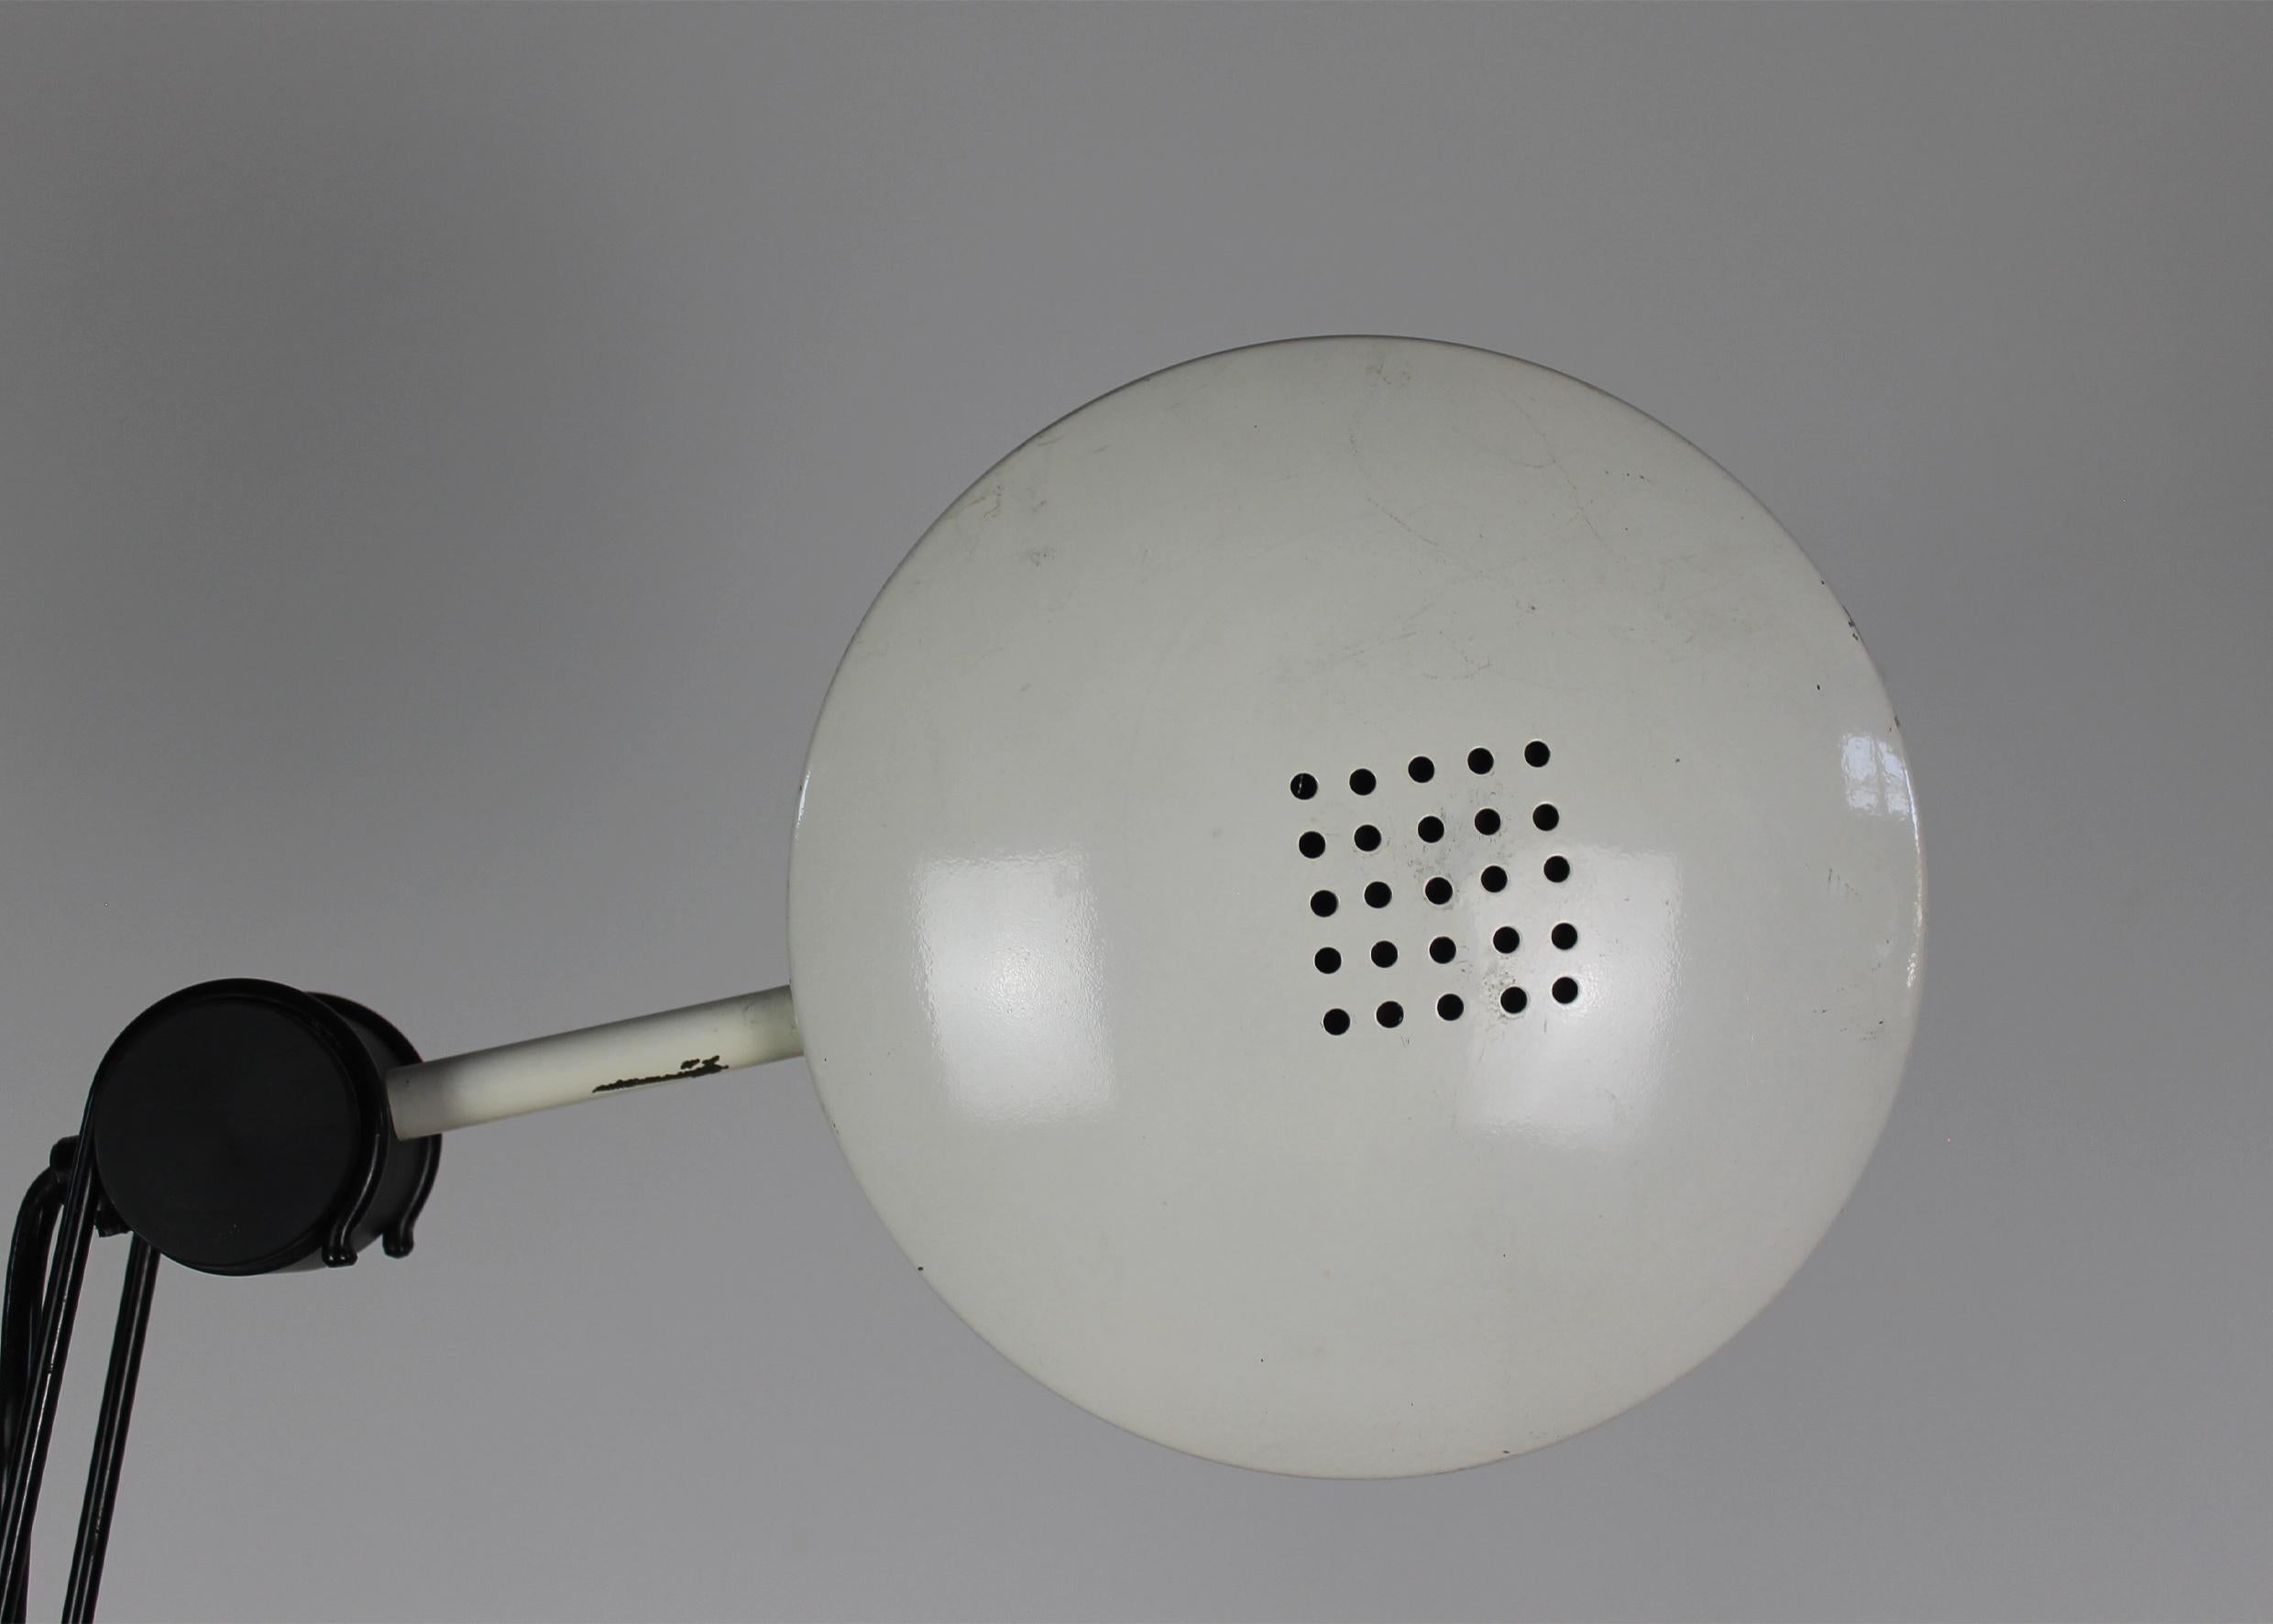 Aluminum 665 or Zeta Desk Lamp in White Lacquered Metal by Martinelli Luce 1970s Italy For Sale